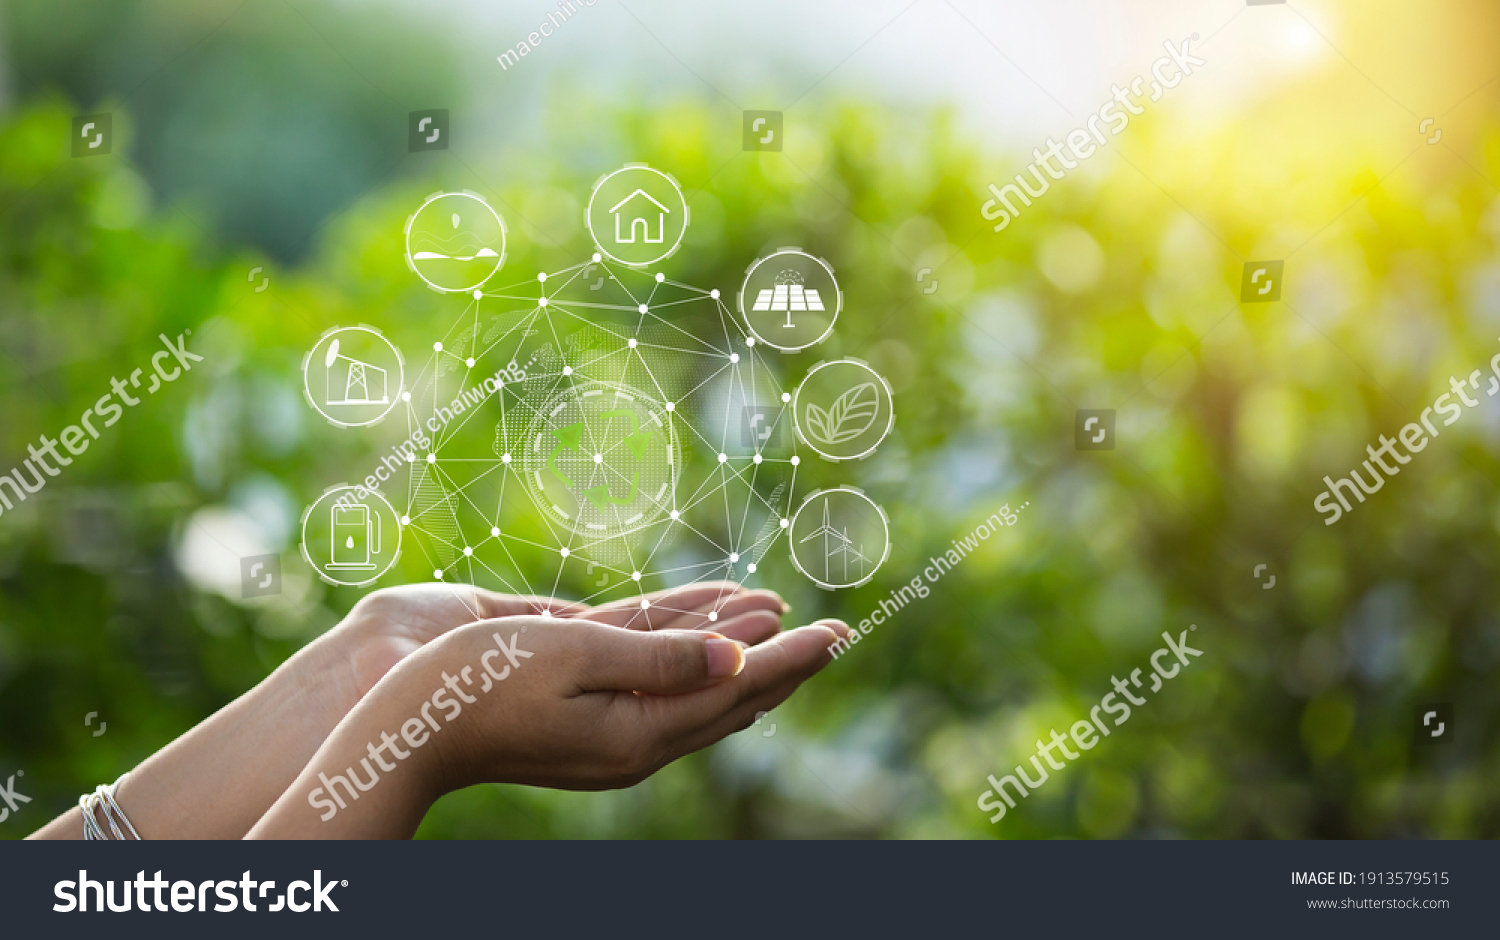 Technology, hand holding with environment Icons over the Network connection on green background. #1913579515